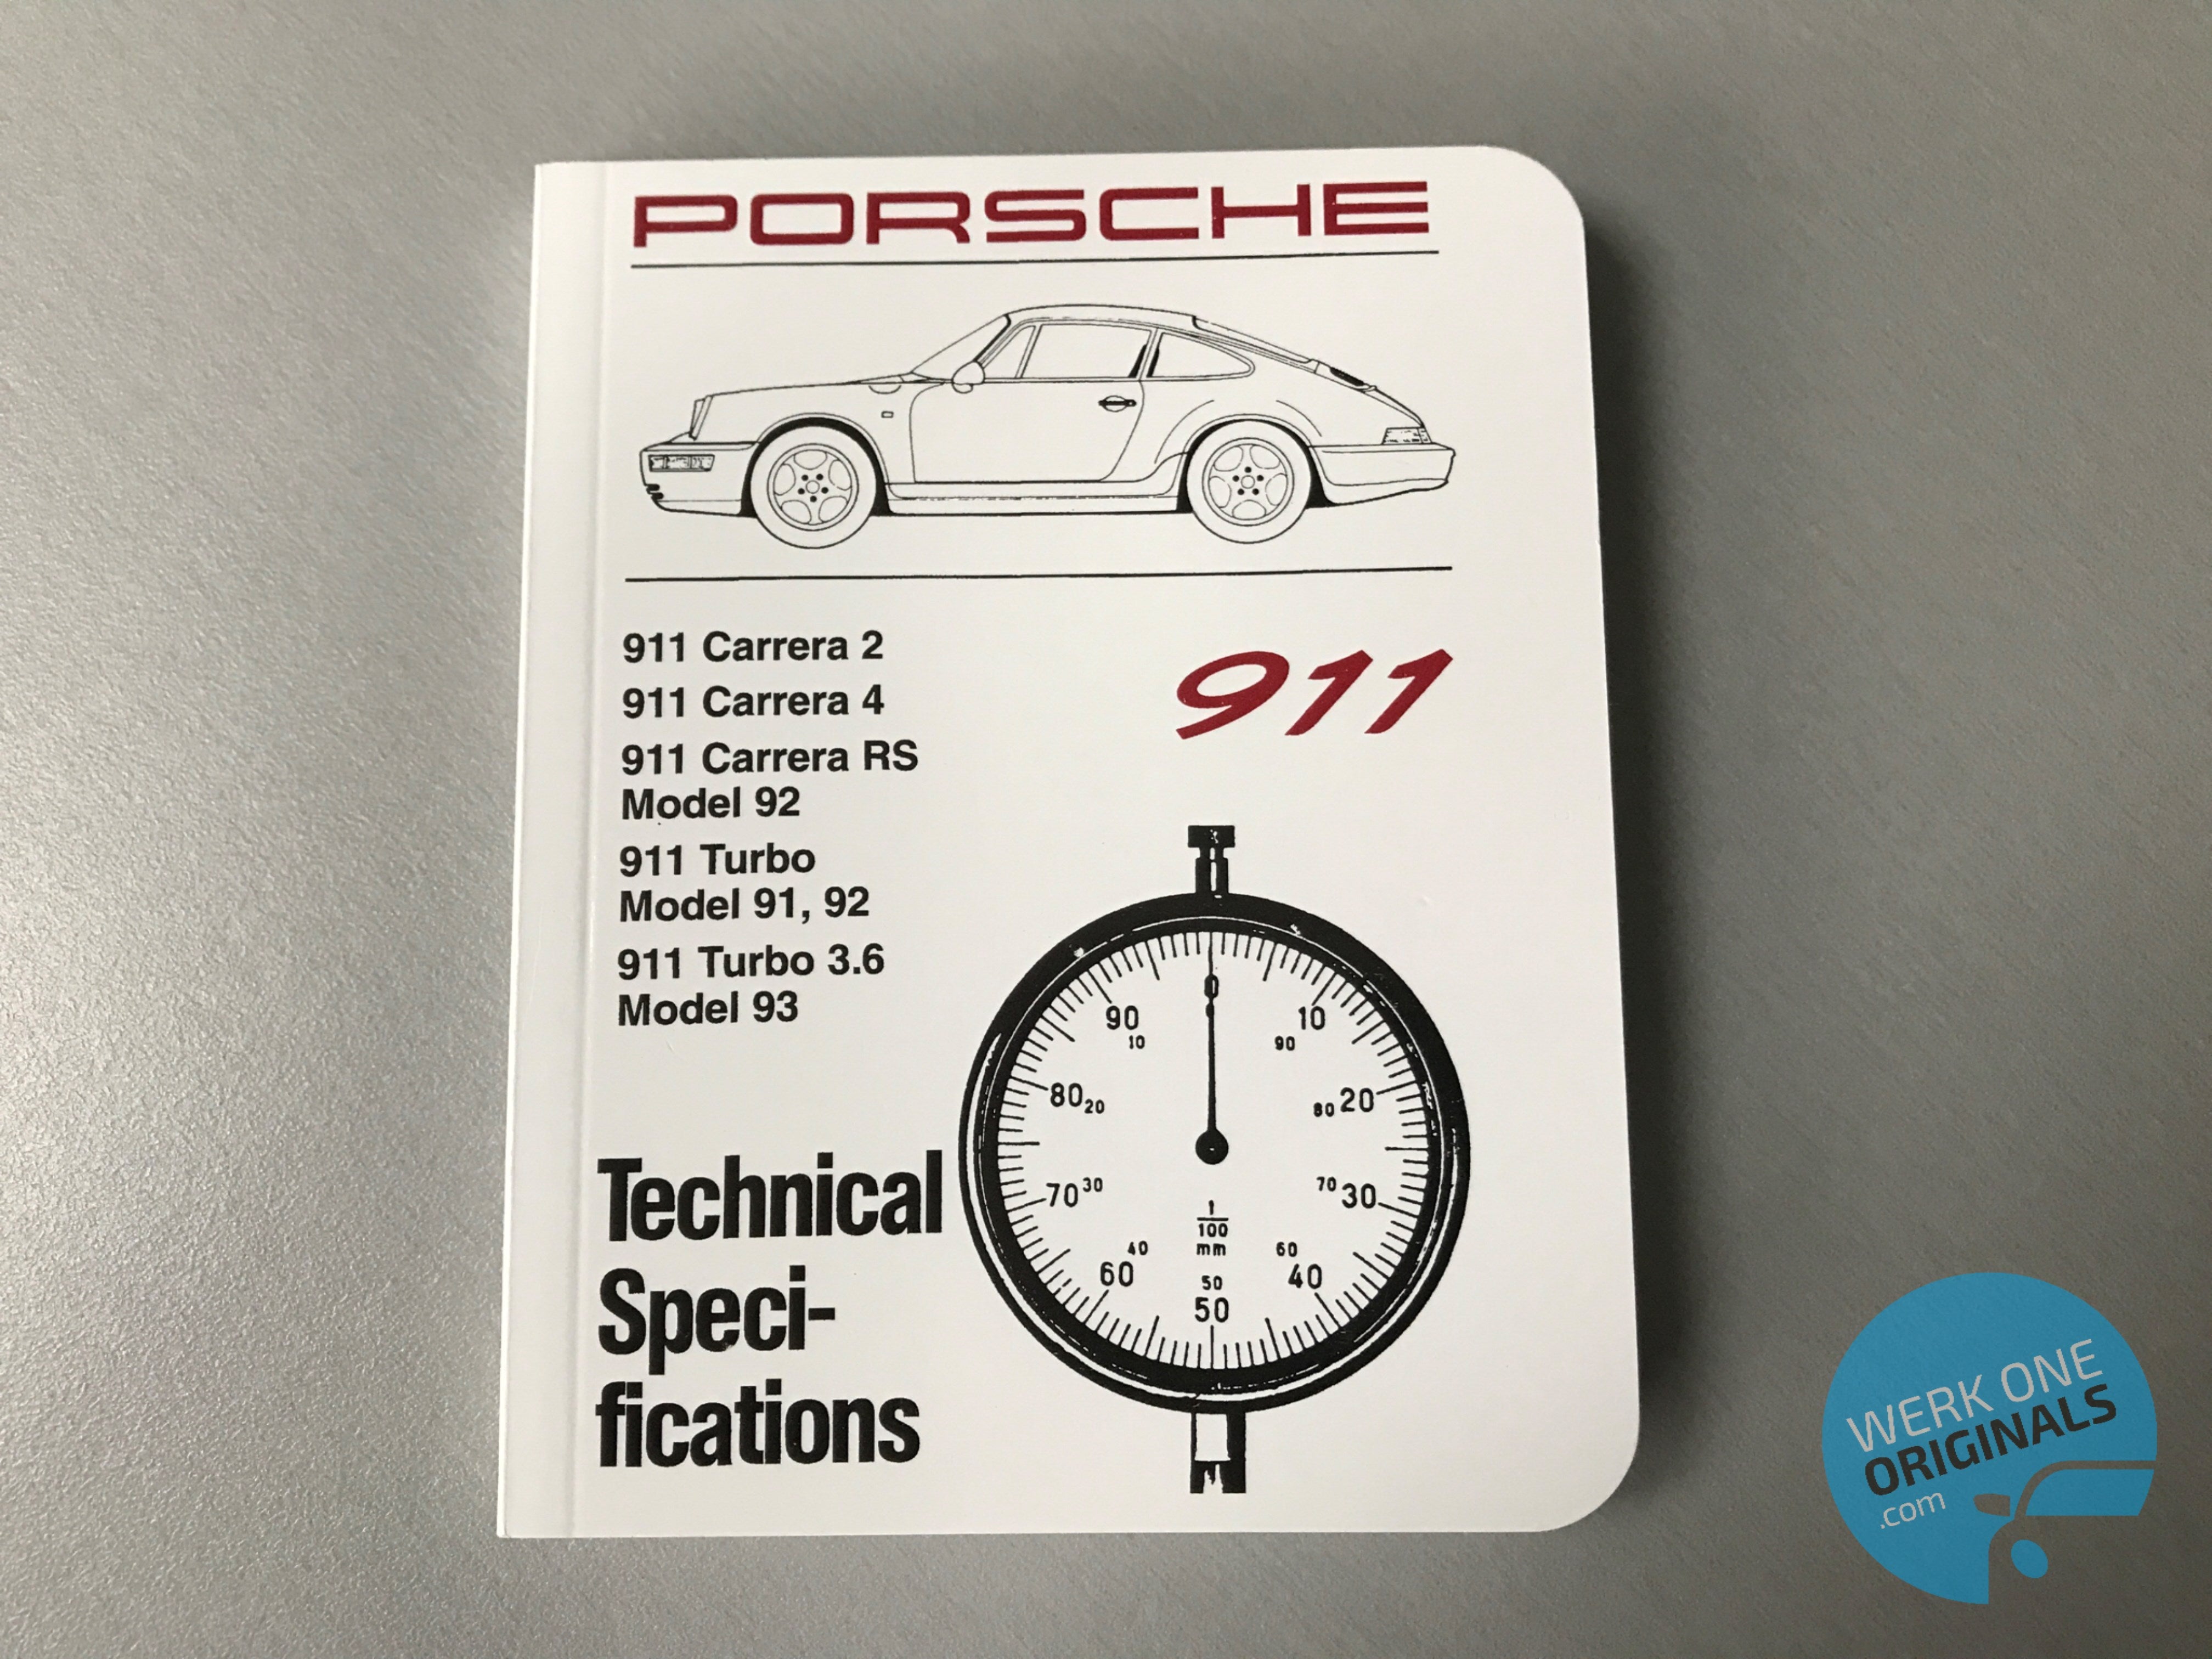 Porsche Technical Specification Manual for 911 Type 964 Models